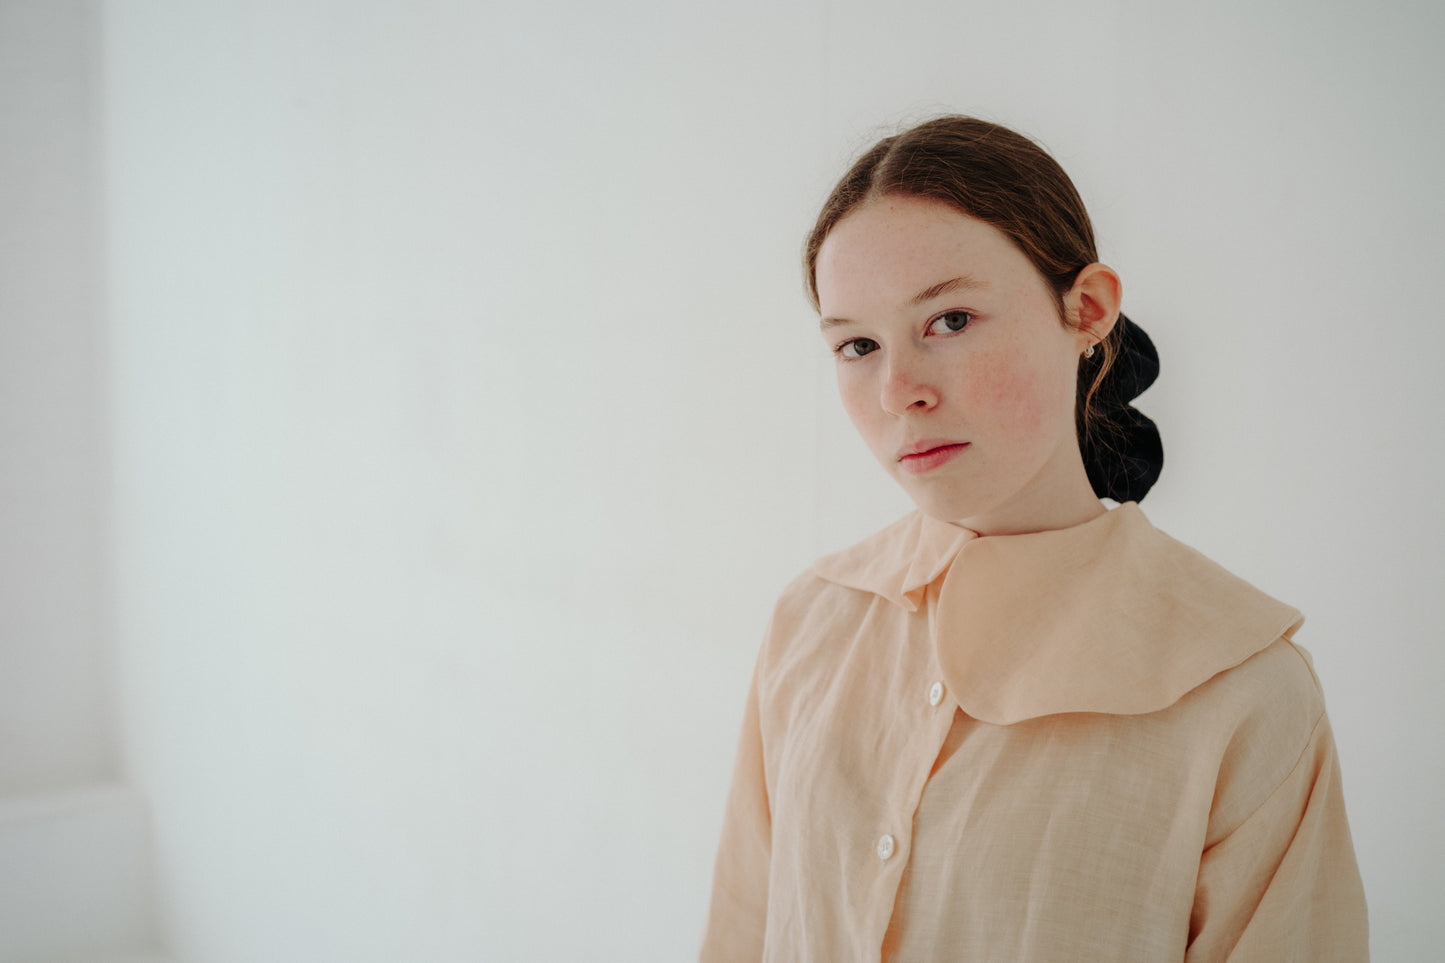 TABITHA BLOUSE | A fun update on our Willow blouse but with big collar drama. The Tabitha blouse features an oversized, asymmetric collar and cuffs with subtle embroidery detail on the back. Created with a very special naturally dyed linen, each blouse ca